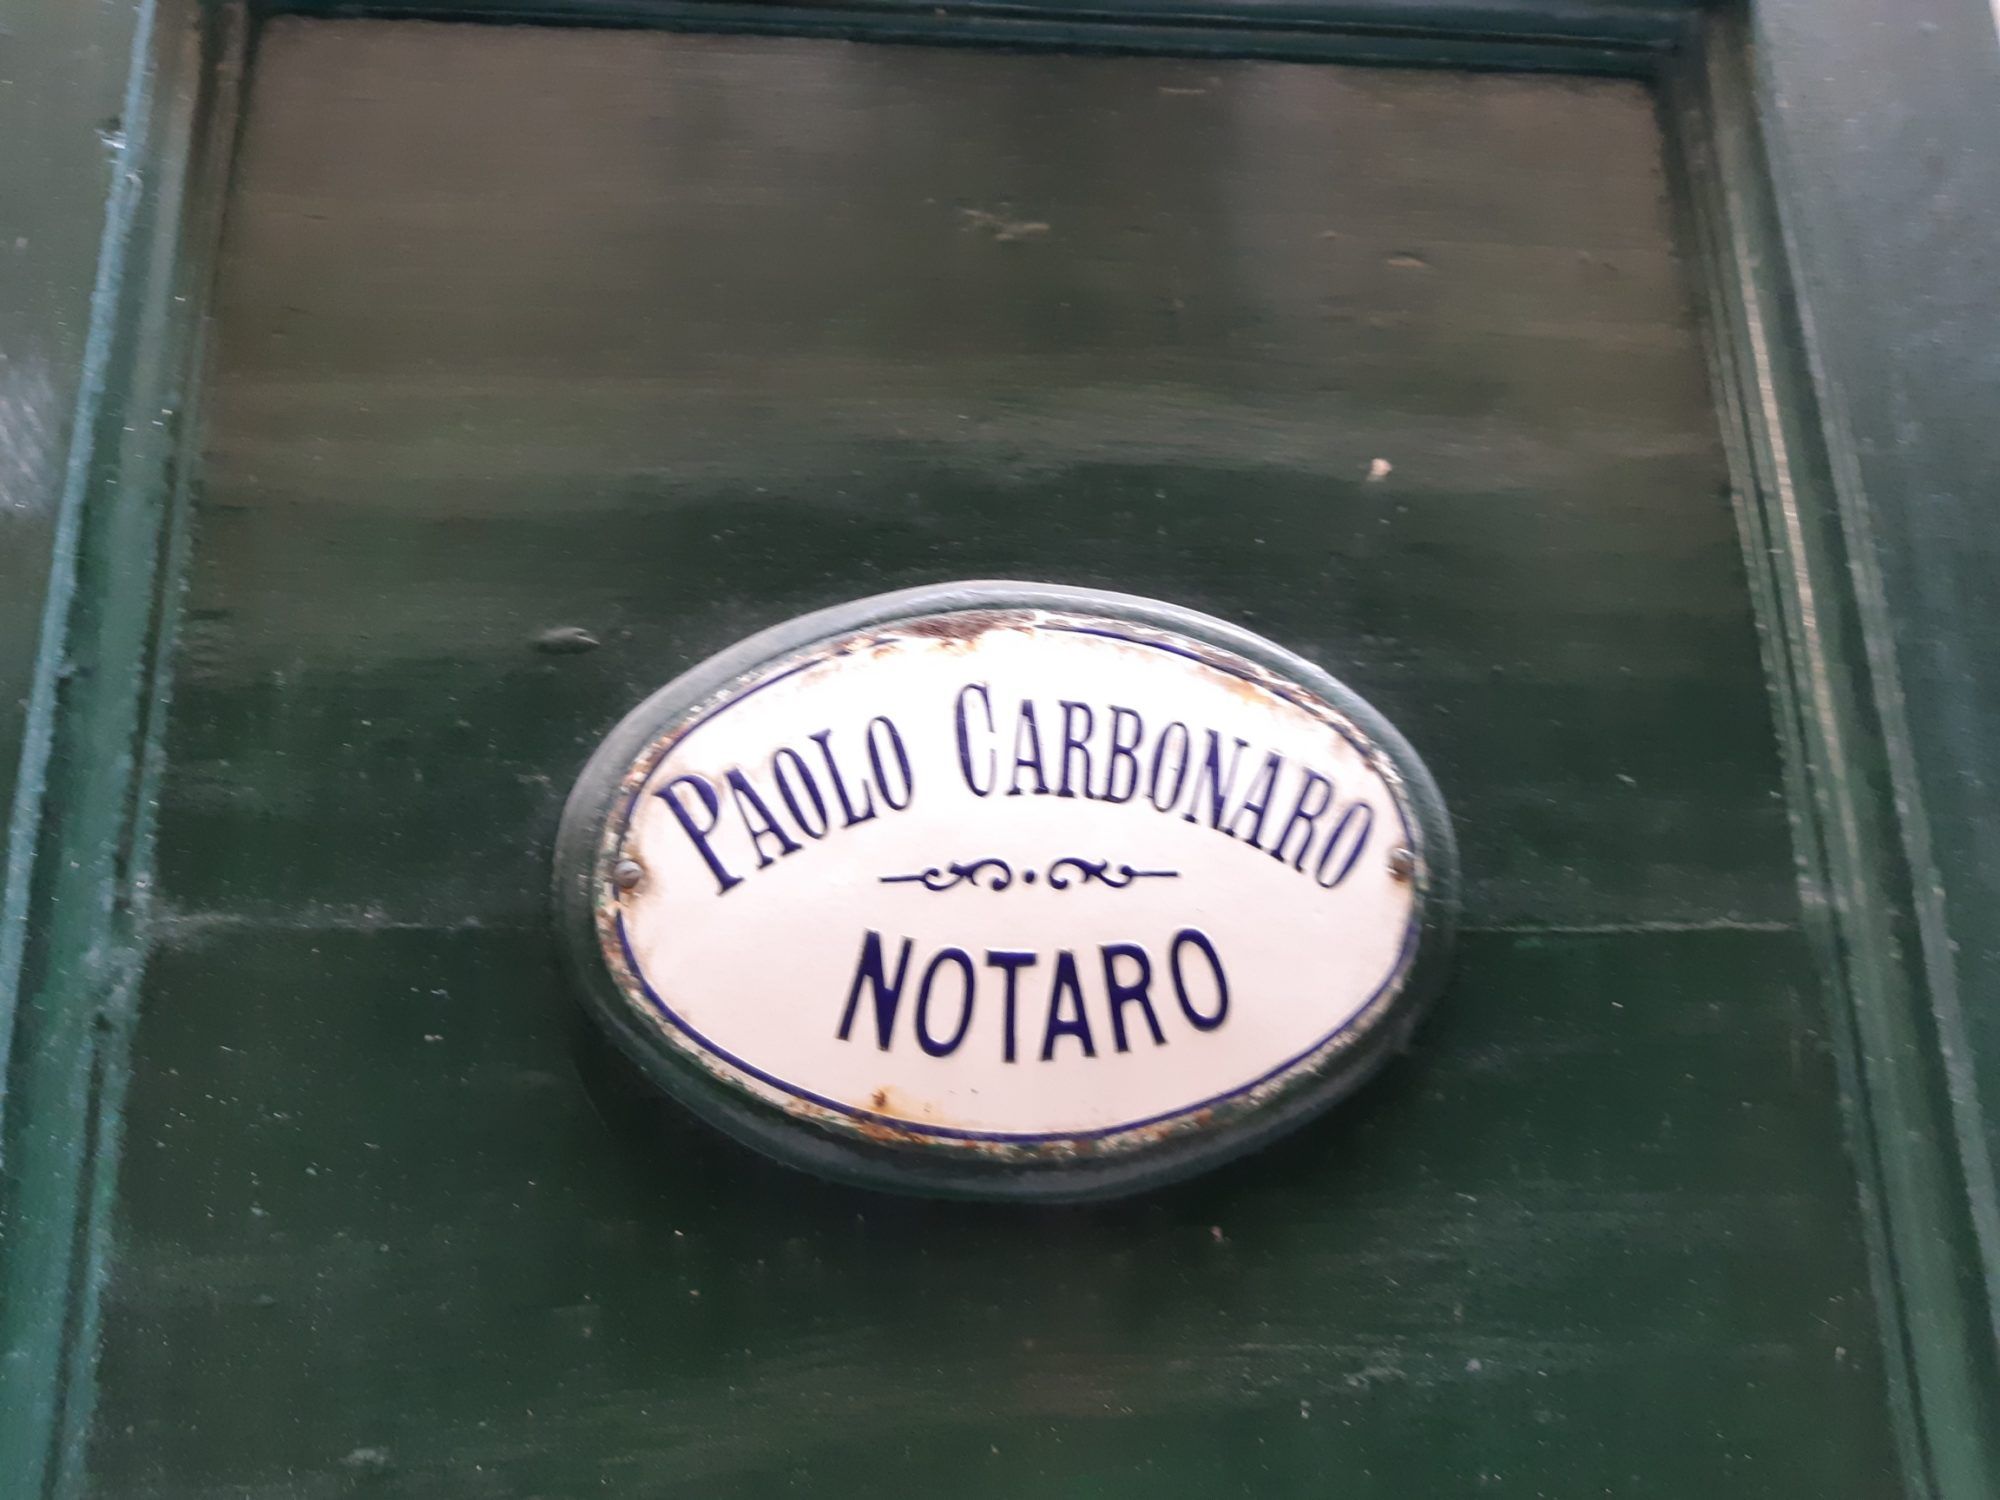 Dr. Peter Carbonaro – Notary